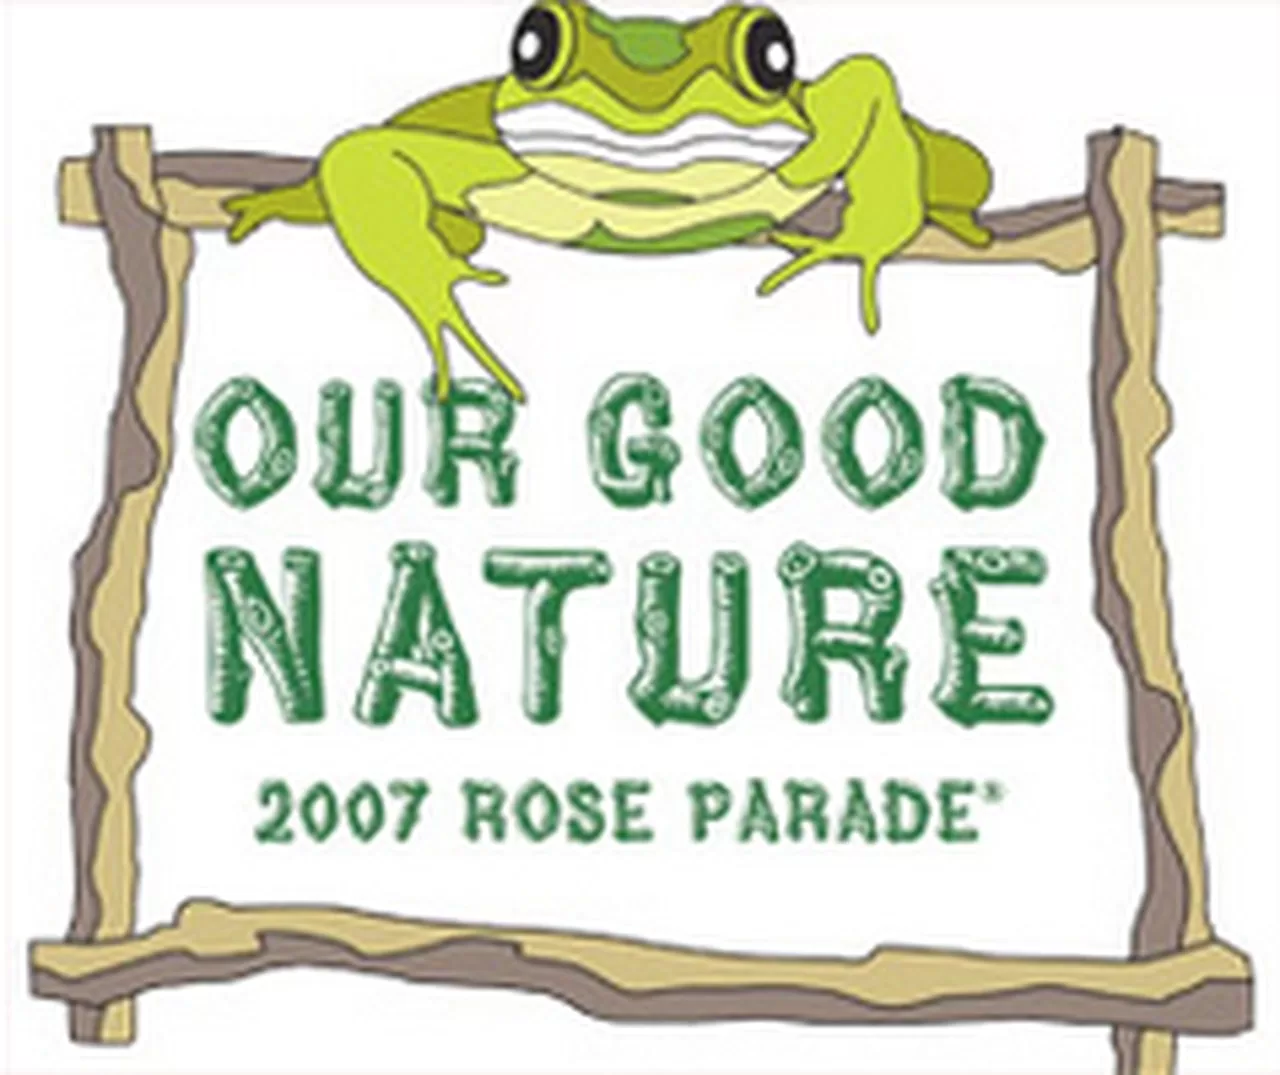 Green frog on wooden sign for Our Good Nature 2007 Rose Parade